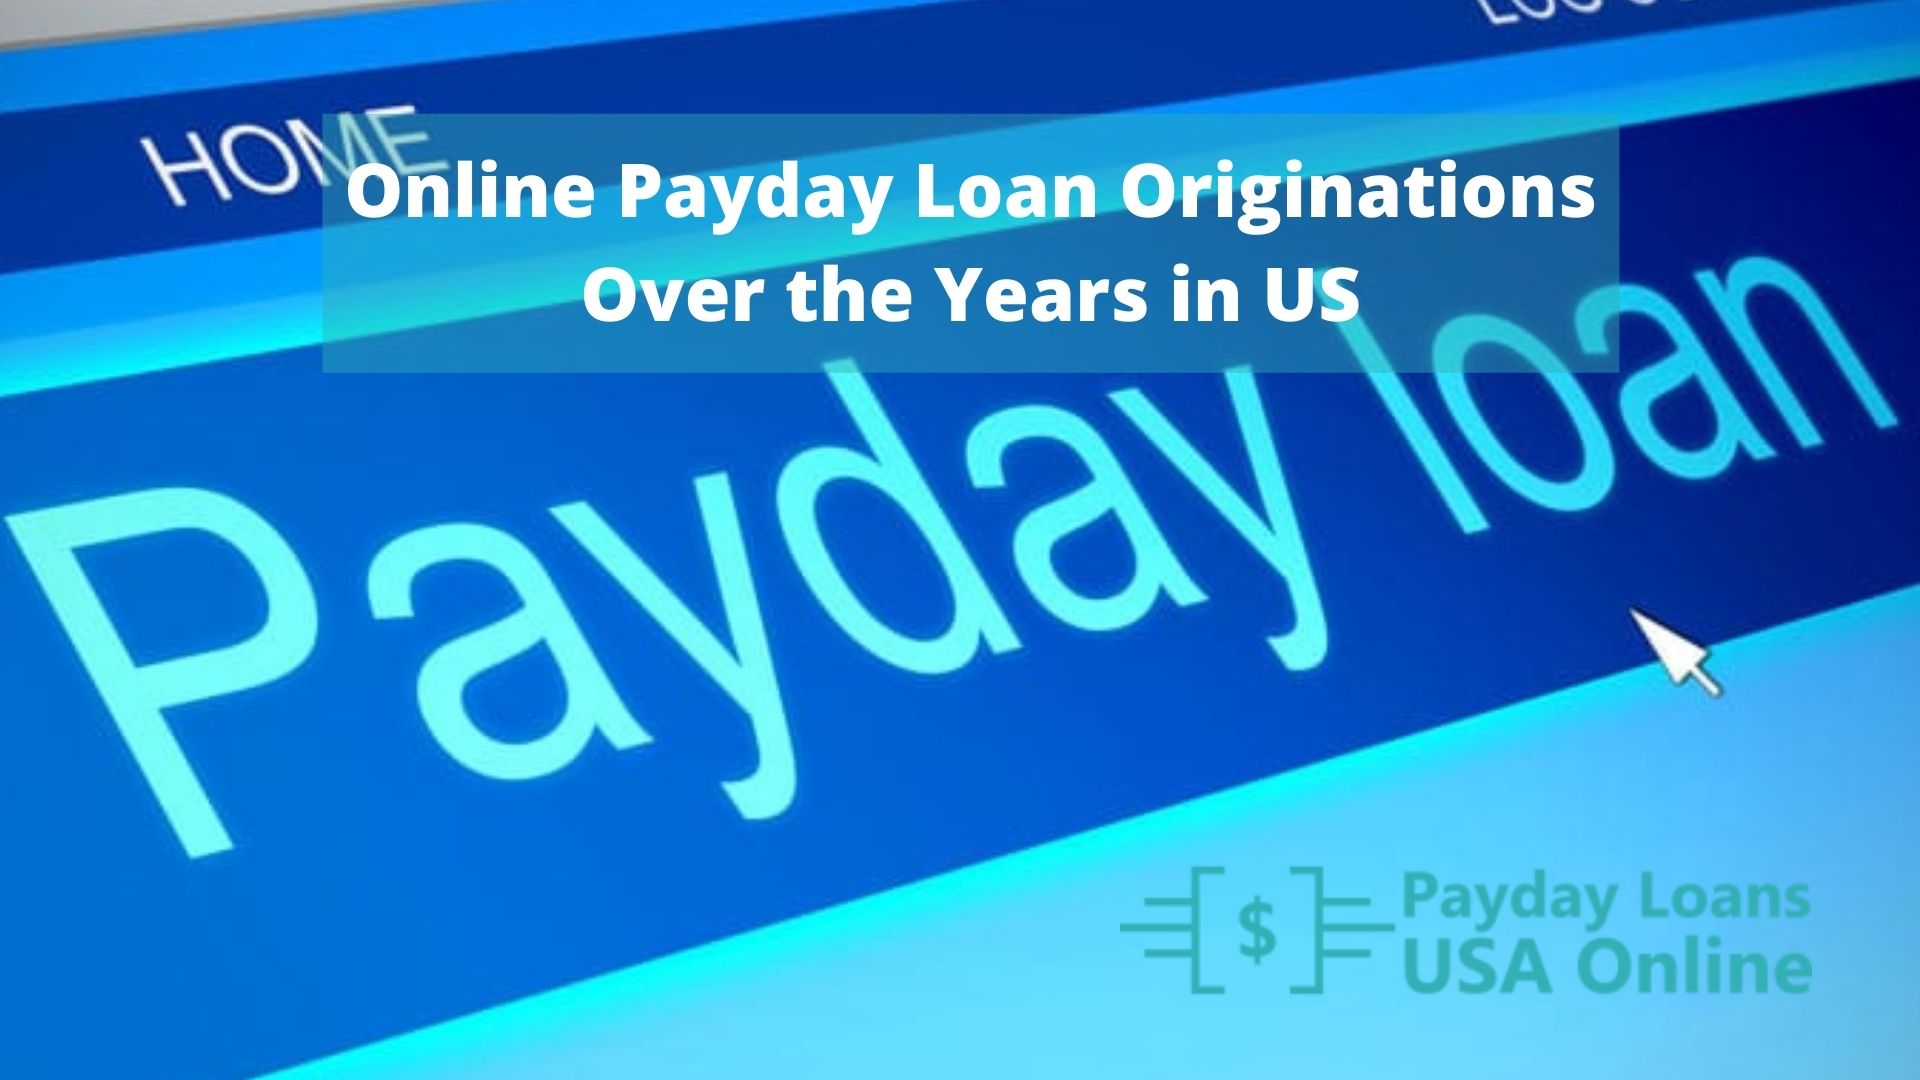 Online Payday Loan Originations Over the Years in US